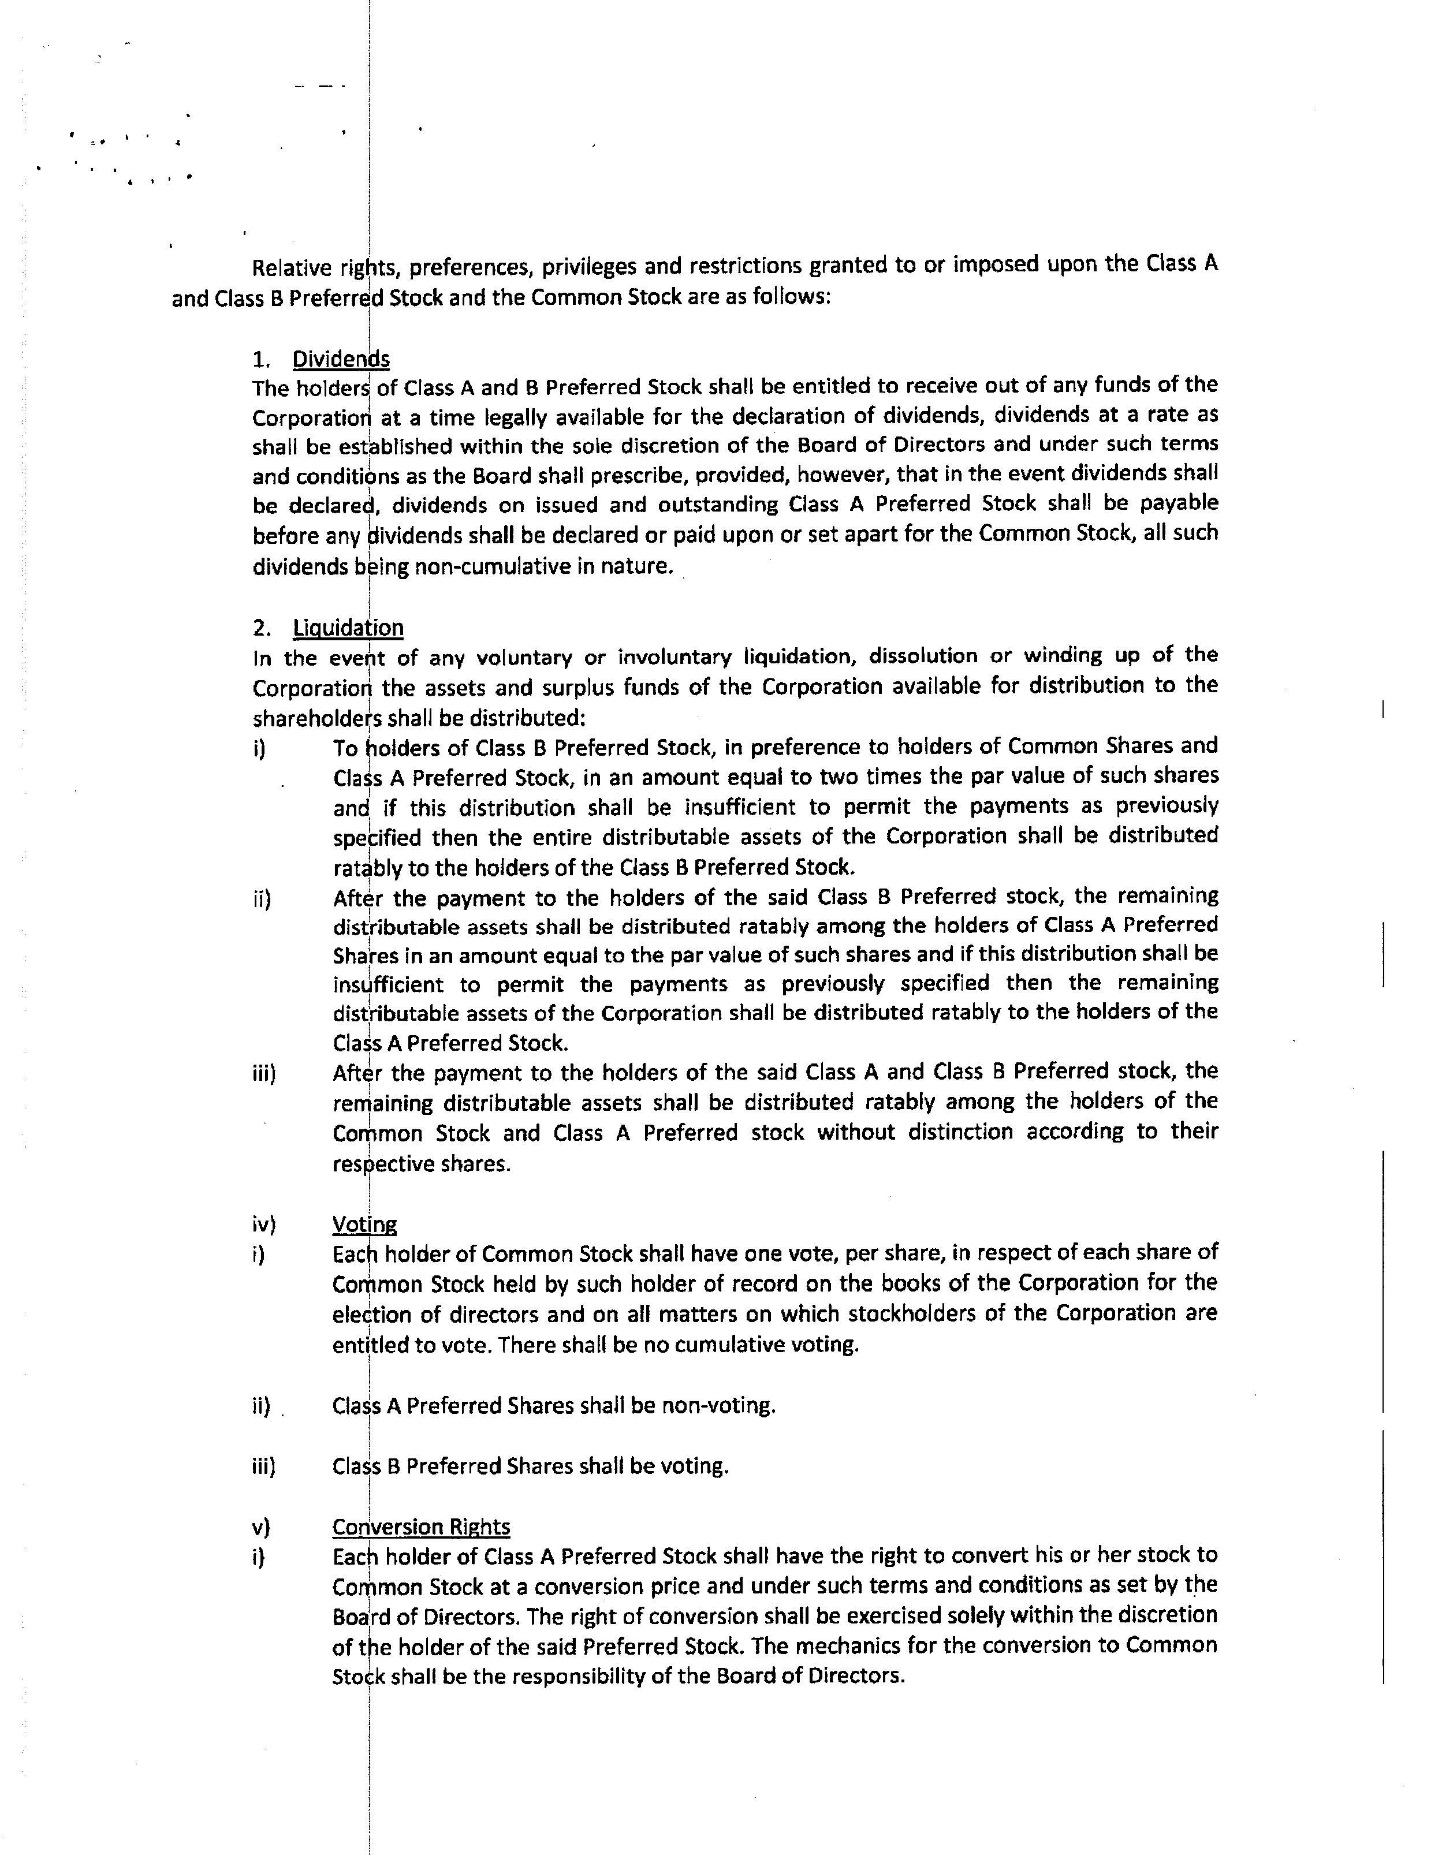 Third Amended Articles of Incorporation_Page_07.jpg